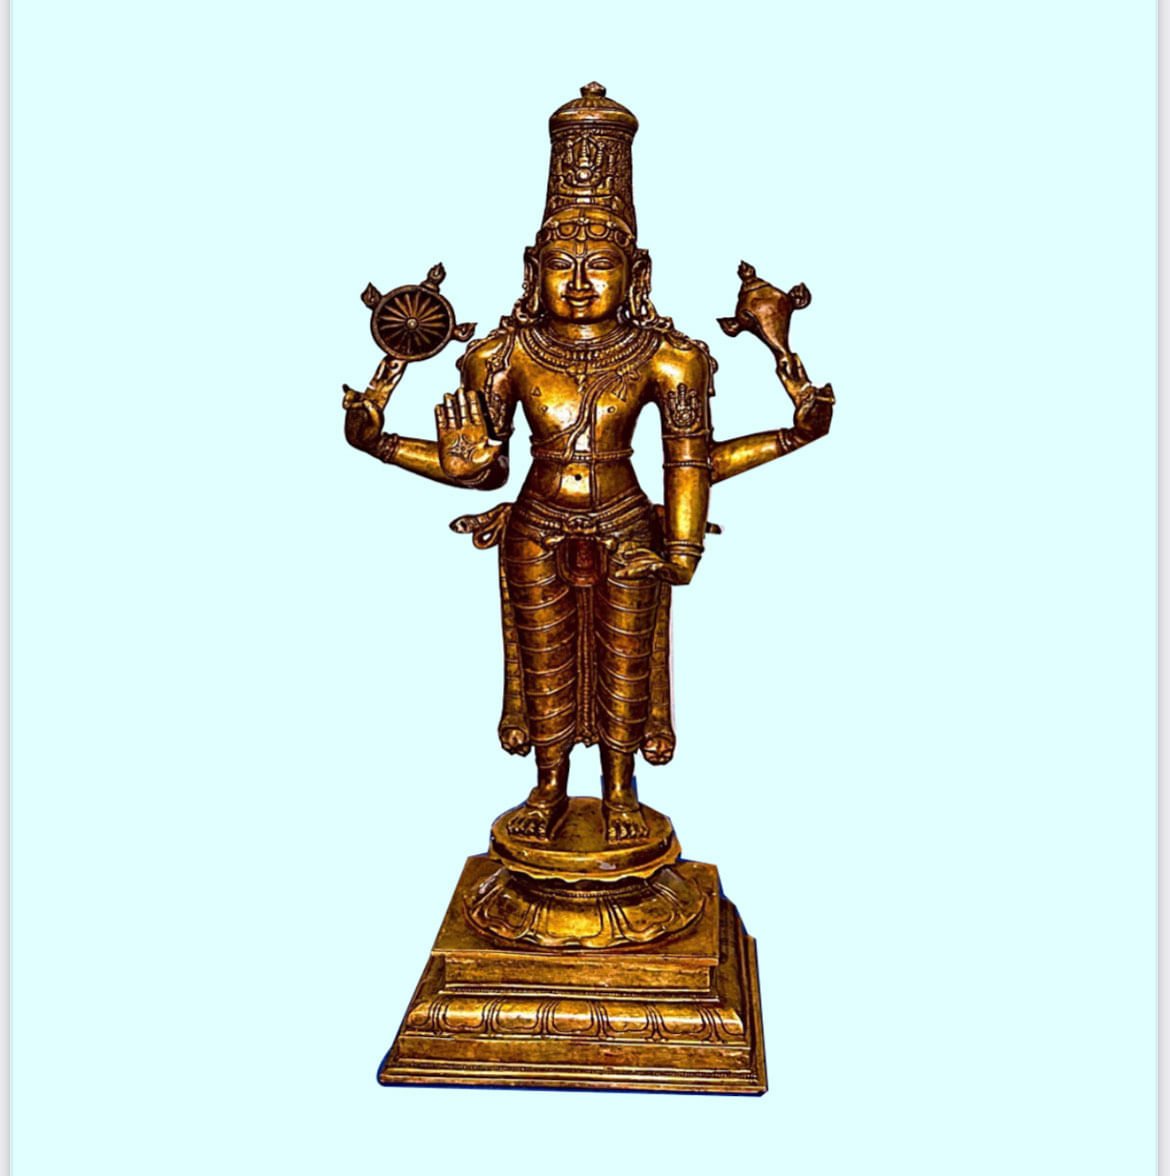 A photo of the Vishnu idol that was handed over.